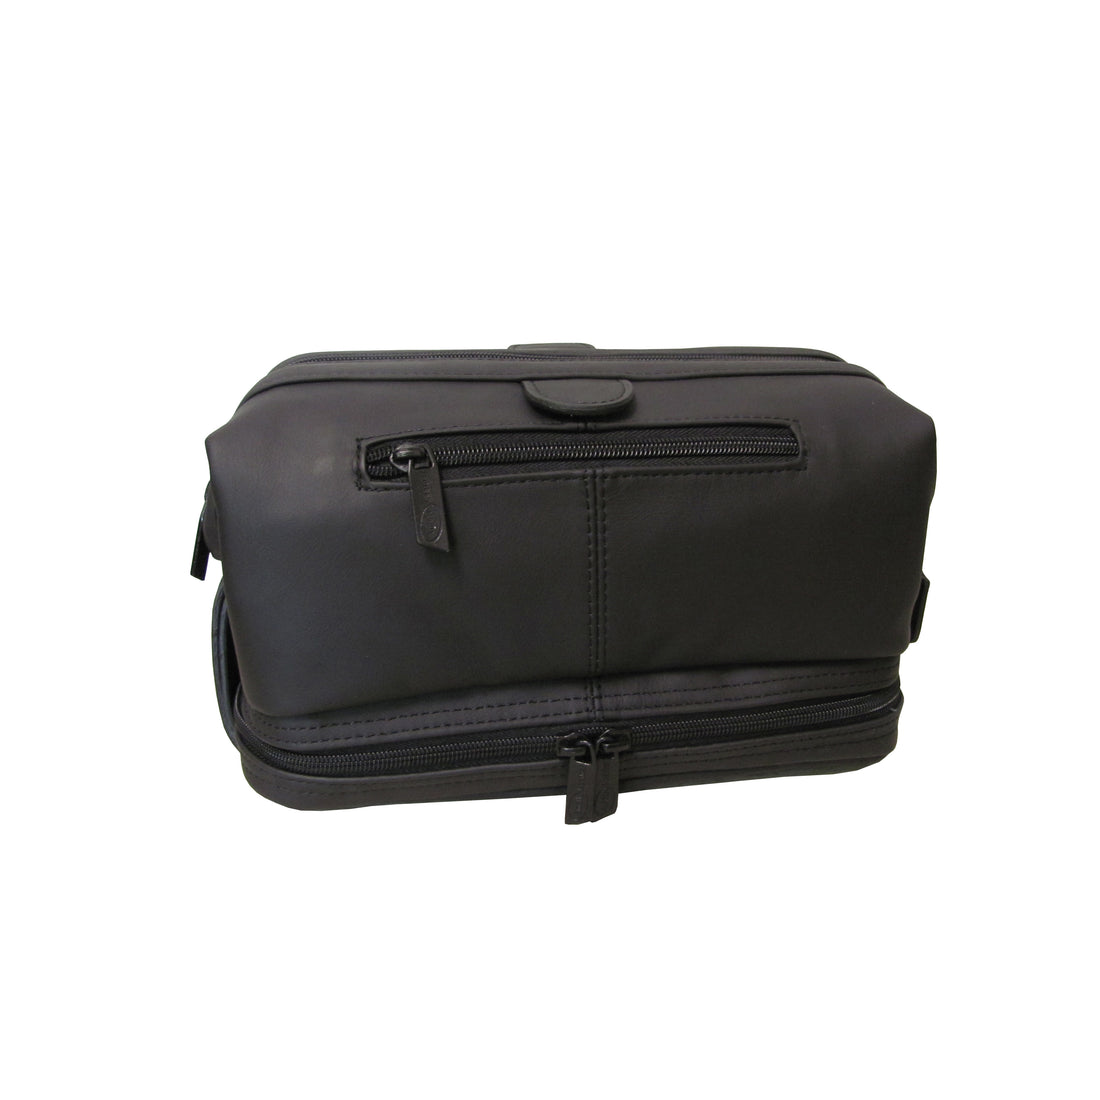 Amerileather Leather Toiletry Bag (#26-023)